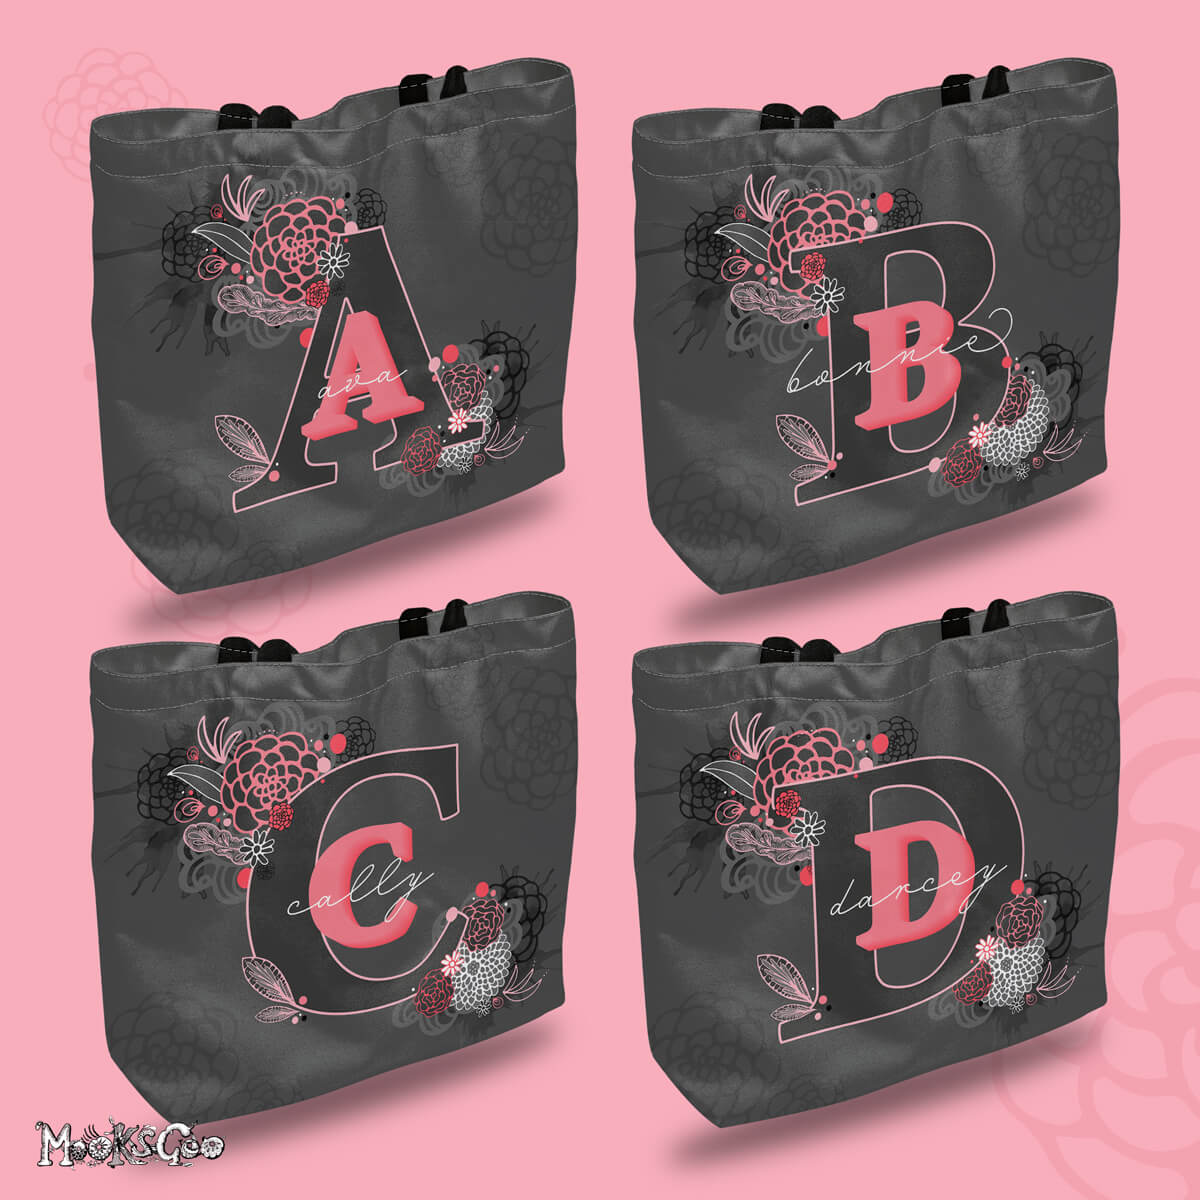 Personalised tote bag for girls, with letter A for Ava, B for Bonnie, C for Cally, and D for Darcey